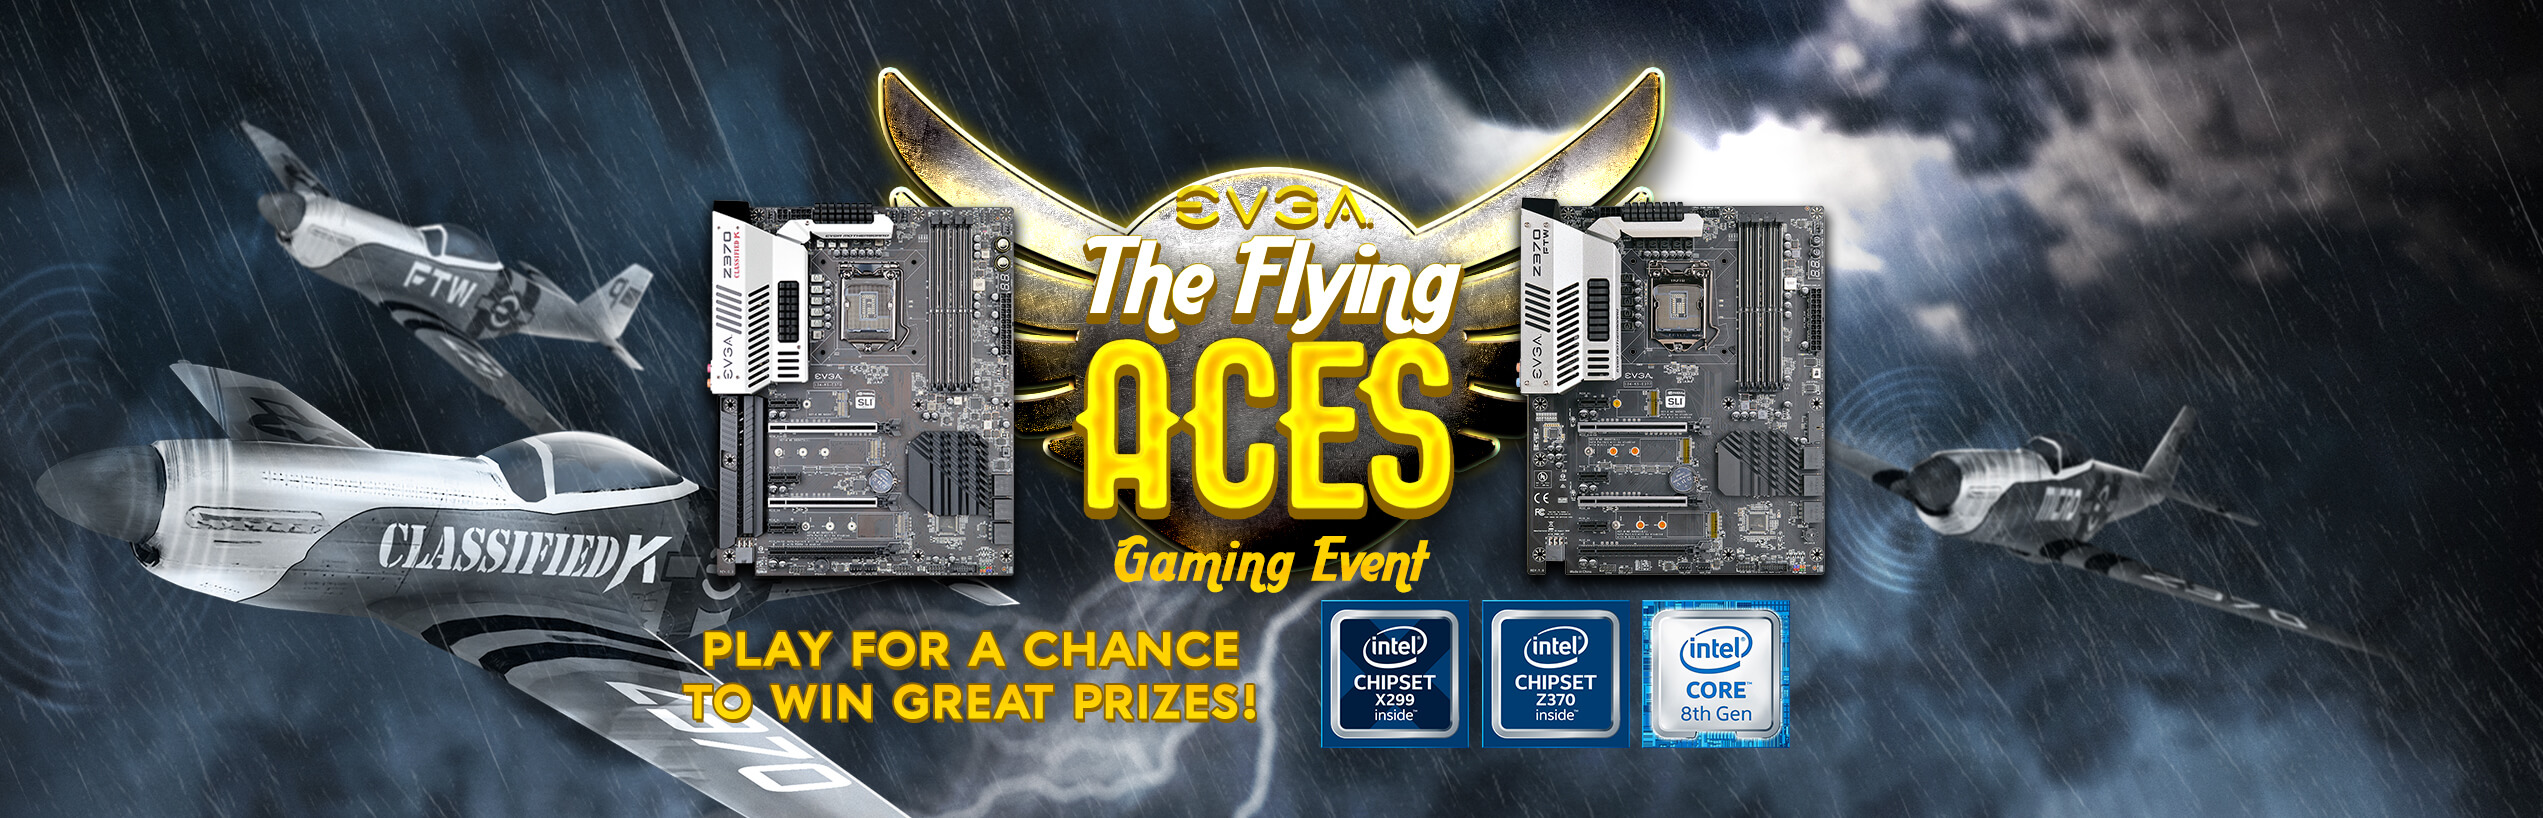 EVGA The Flying Aces Gaming Event